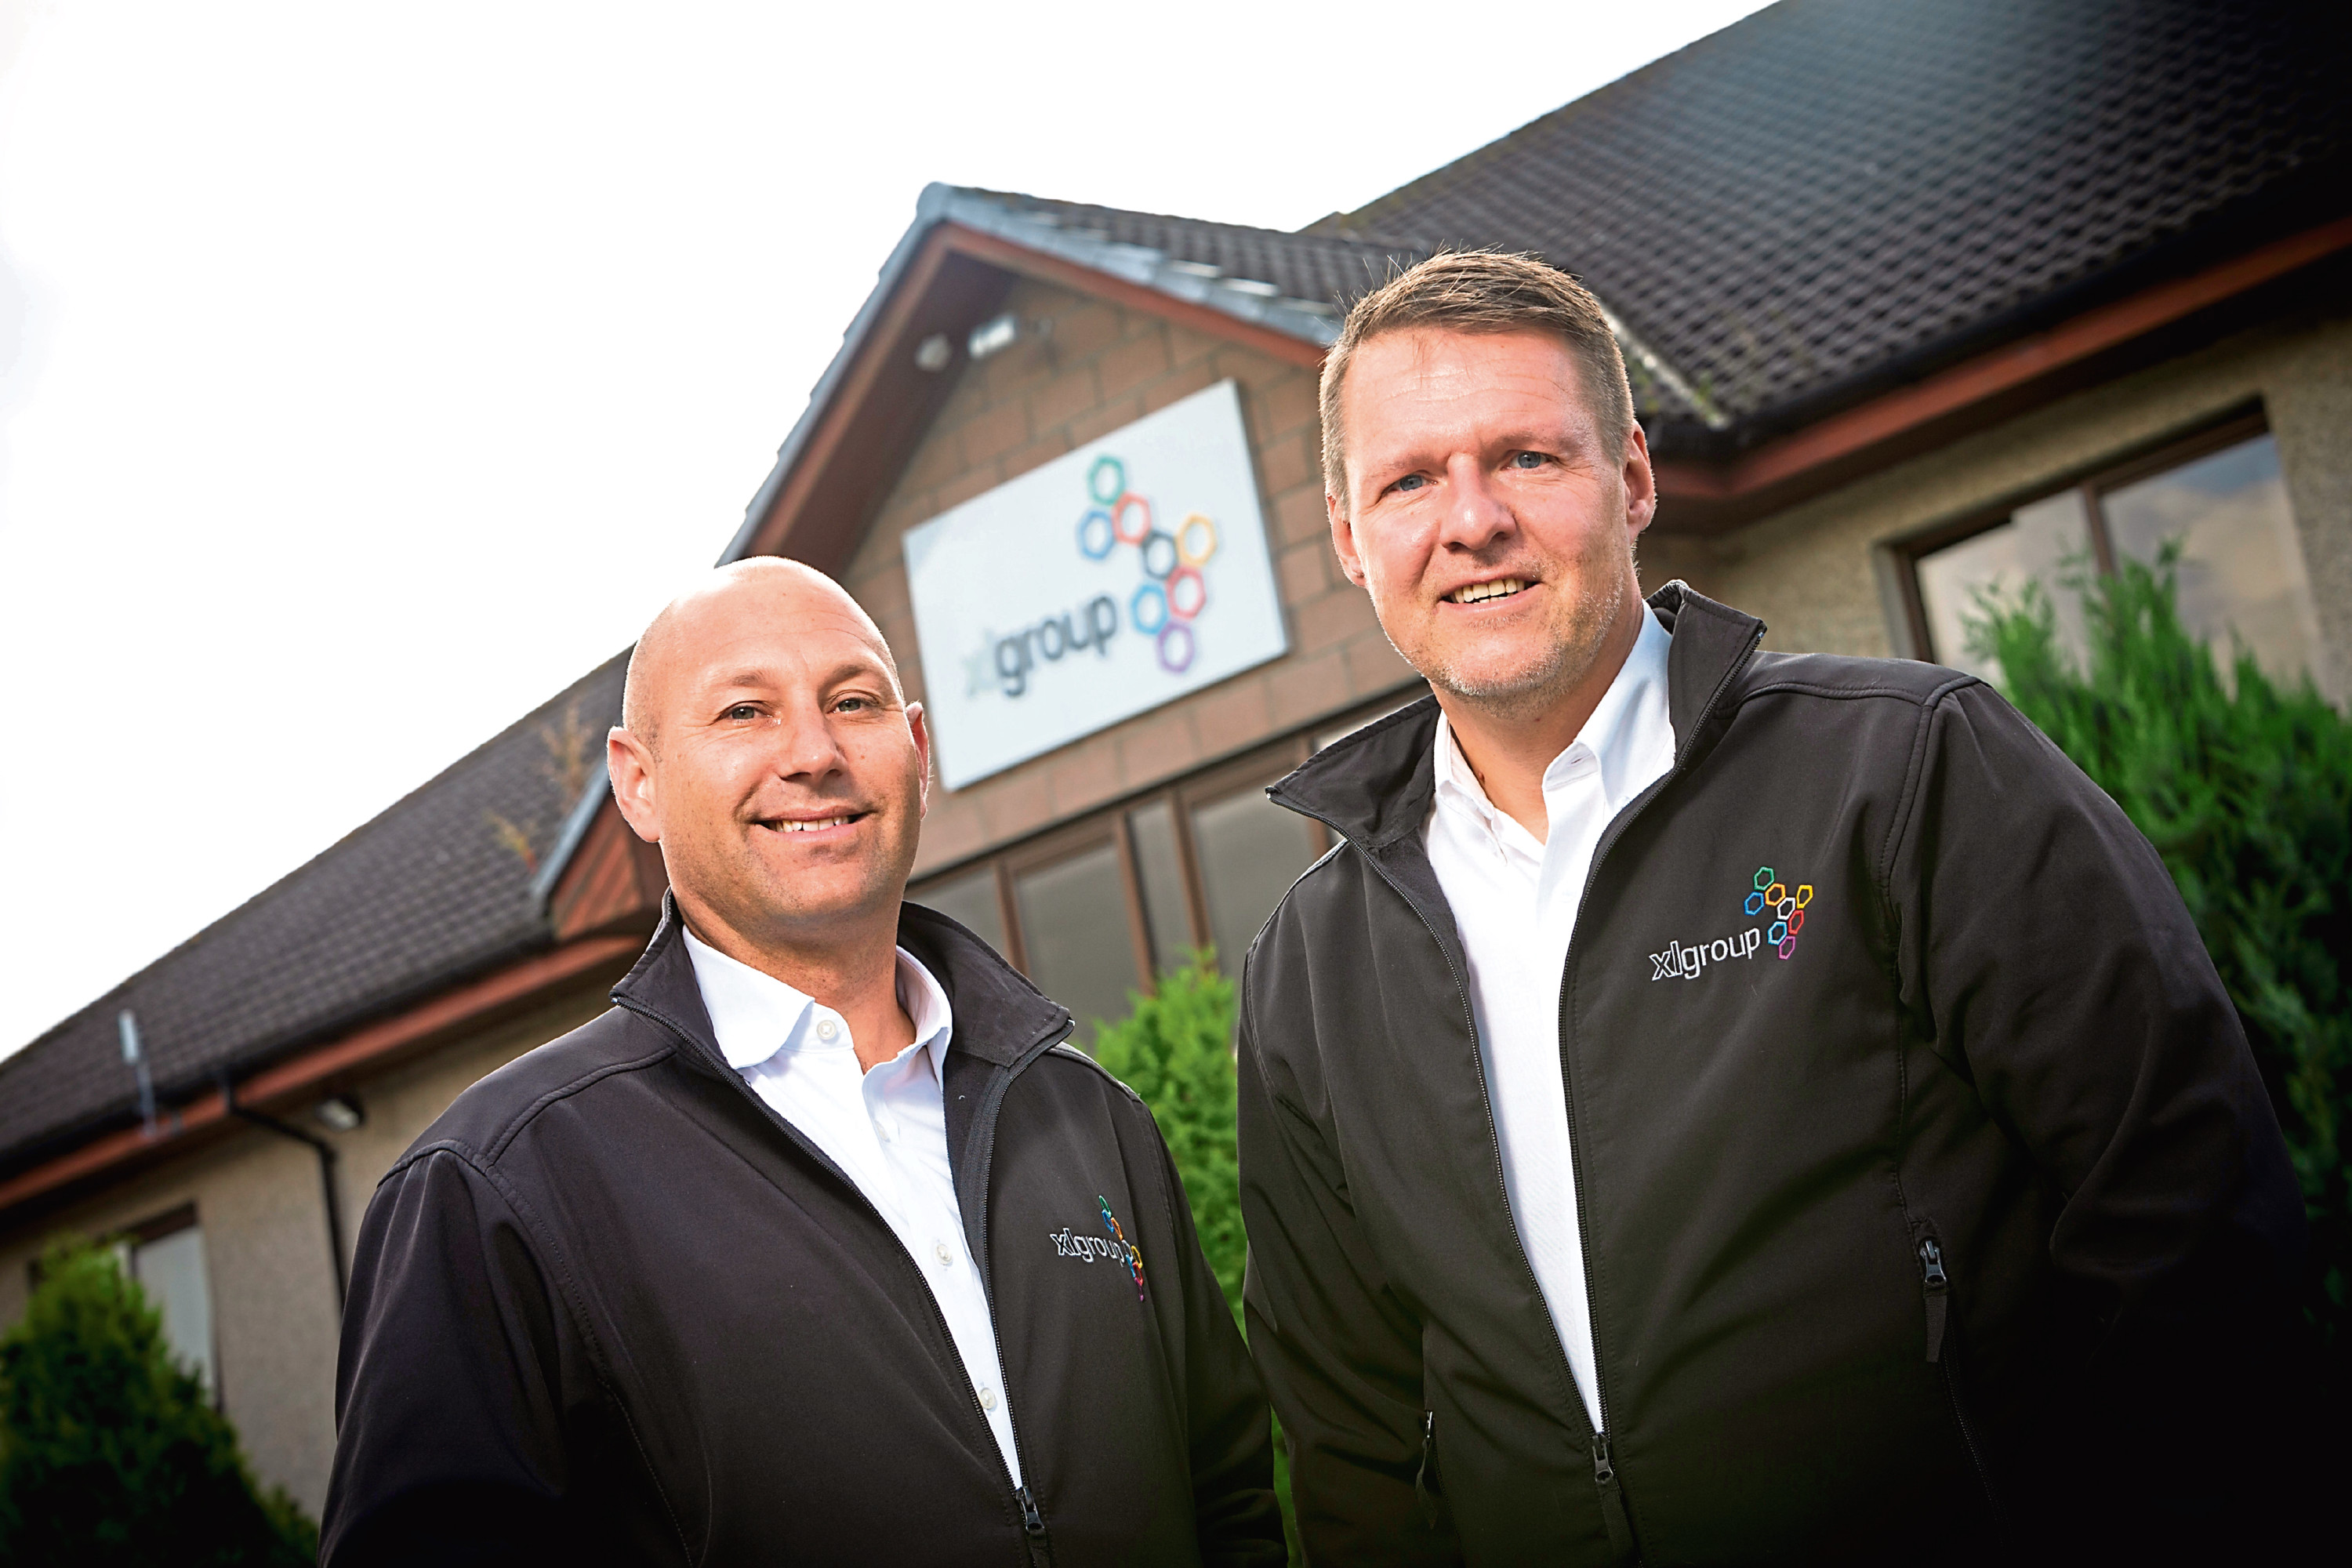 Richard Dodunski, left, and Mike Fergusson become operations director and UK sales director, respectively